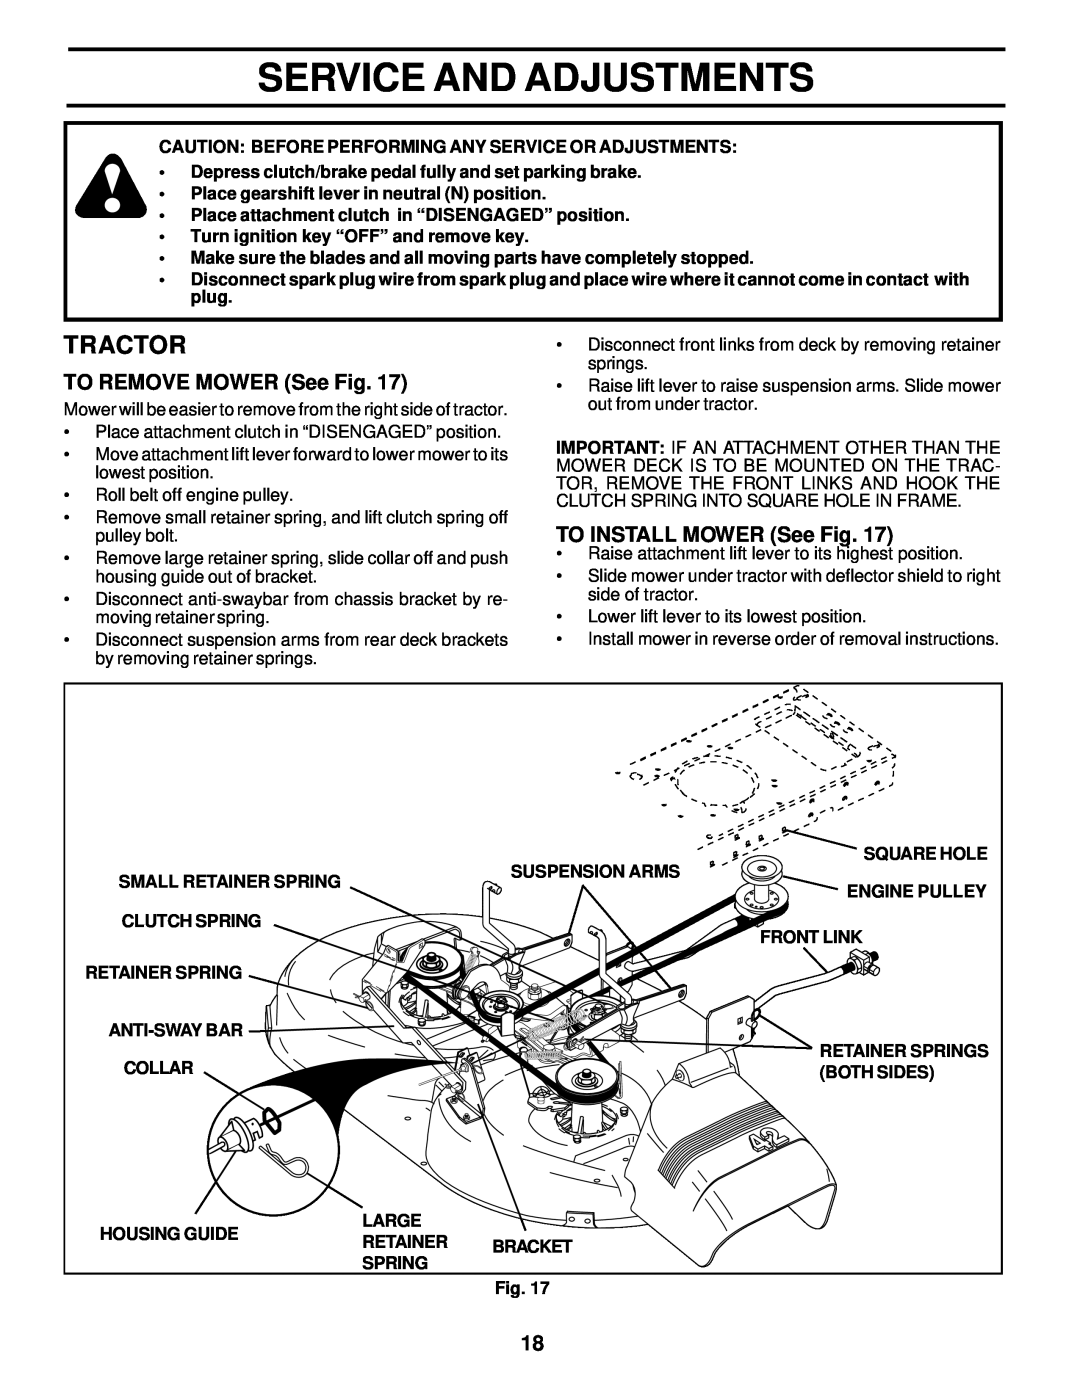 Poulan 178108 owner manual Service And Adjustments, TO REMOVE MOWER See Fig, TO INSTALL MOWER See Fig, Tractor 